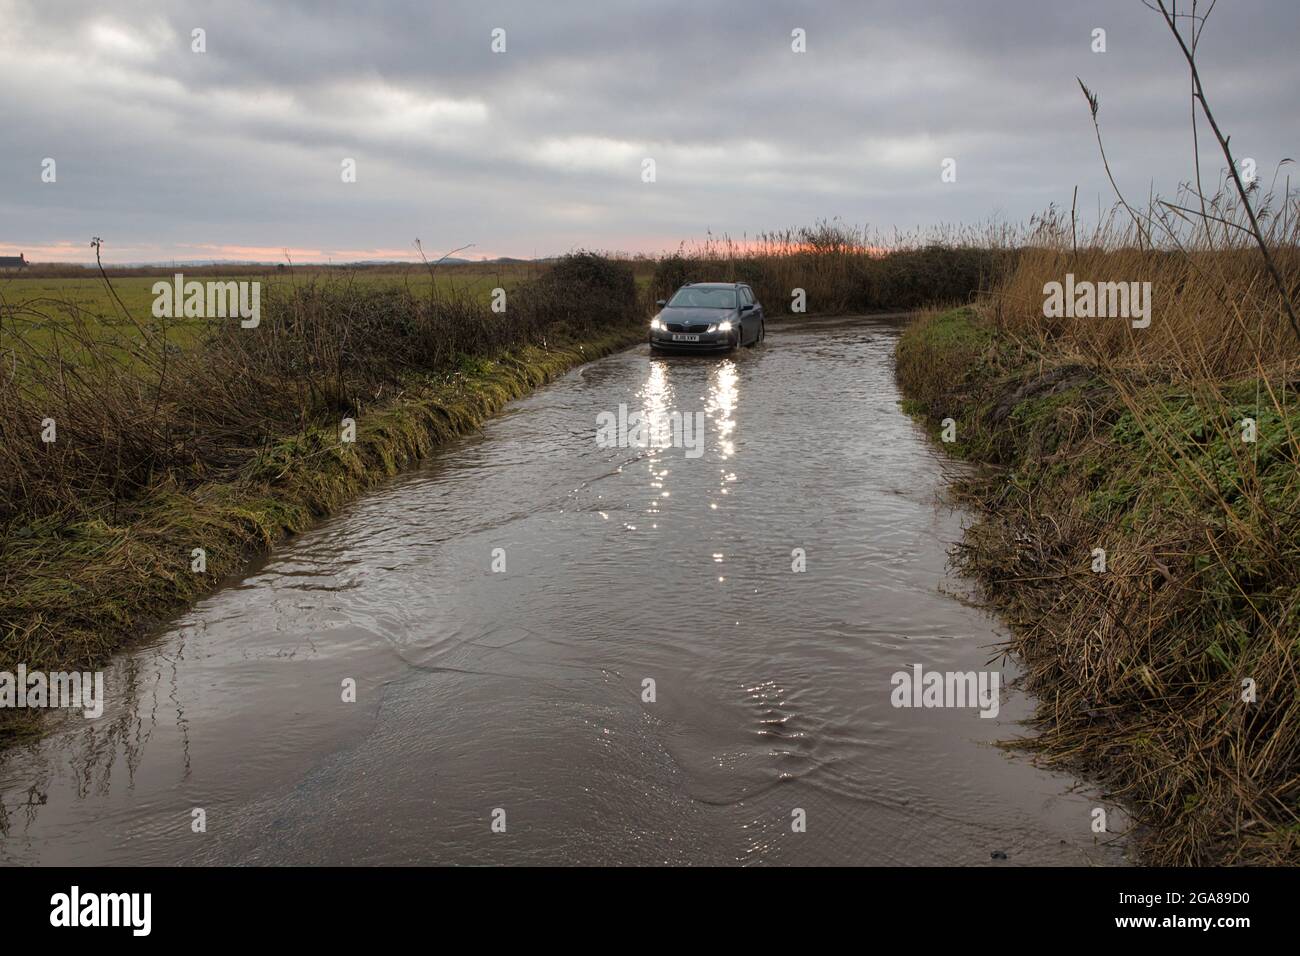 A flooded road in the countryside near Braunton in North Devon, England, UK with a car about to drive through Stock Photo